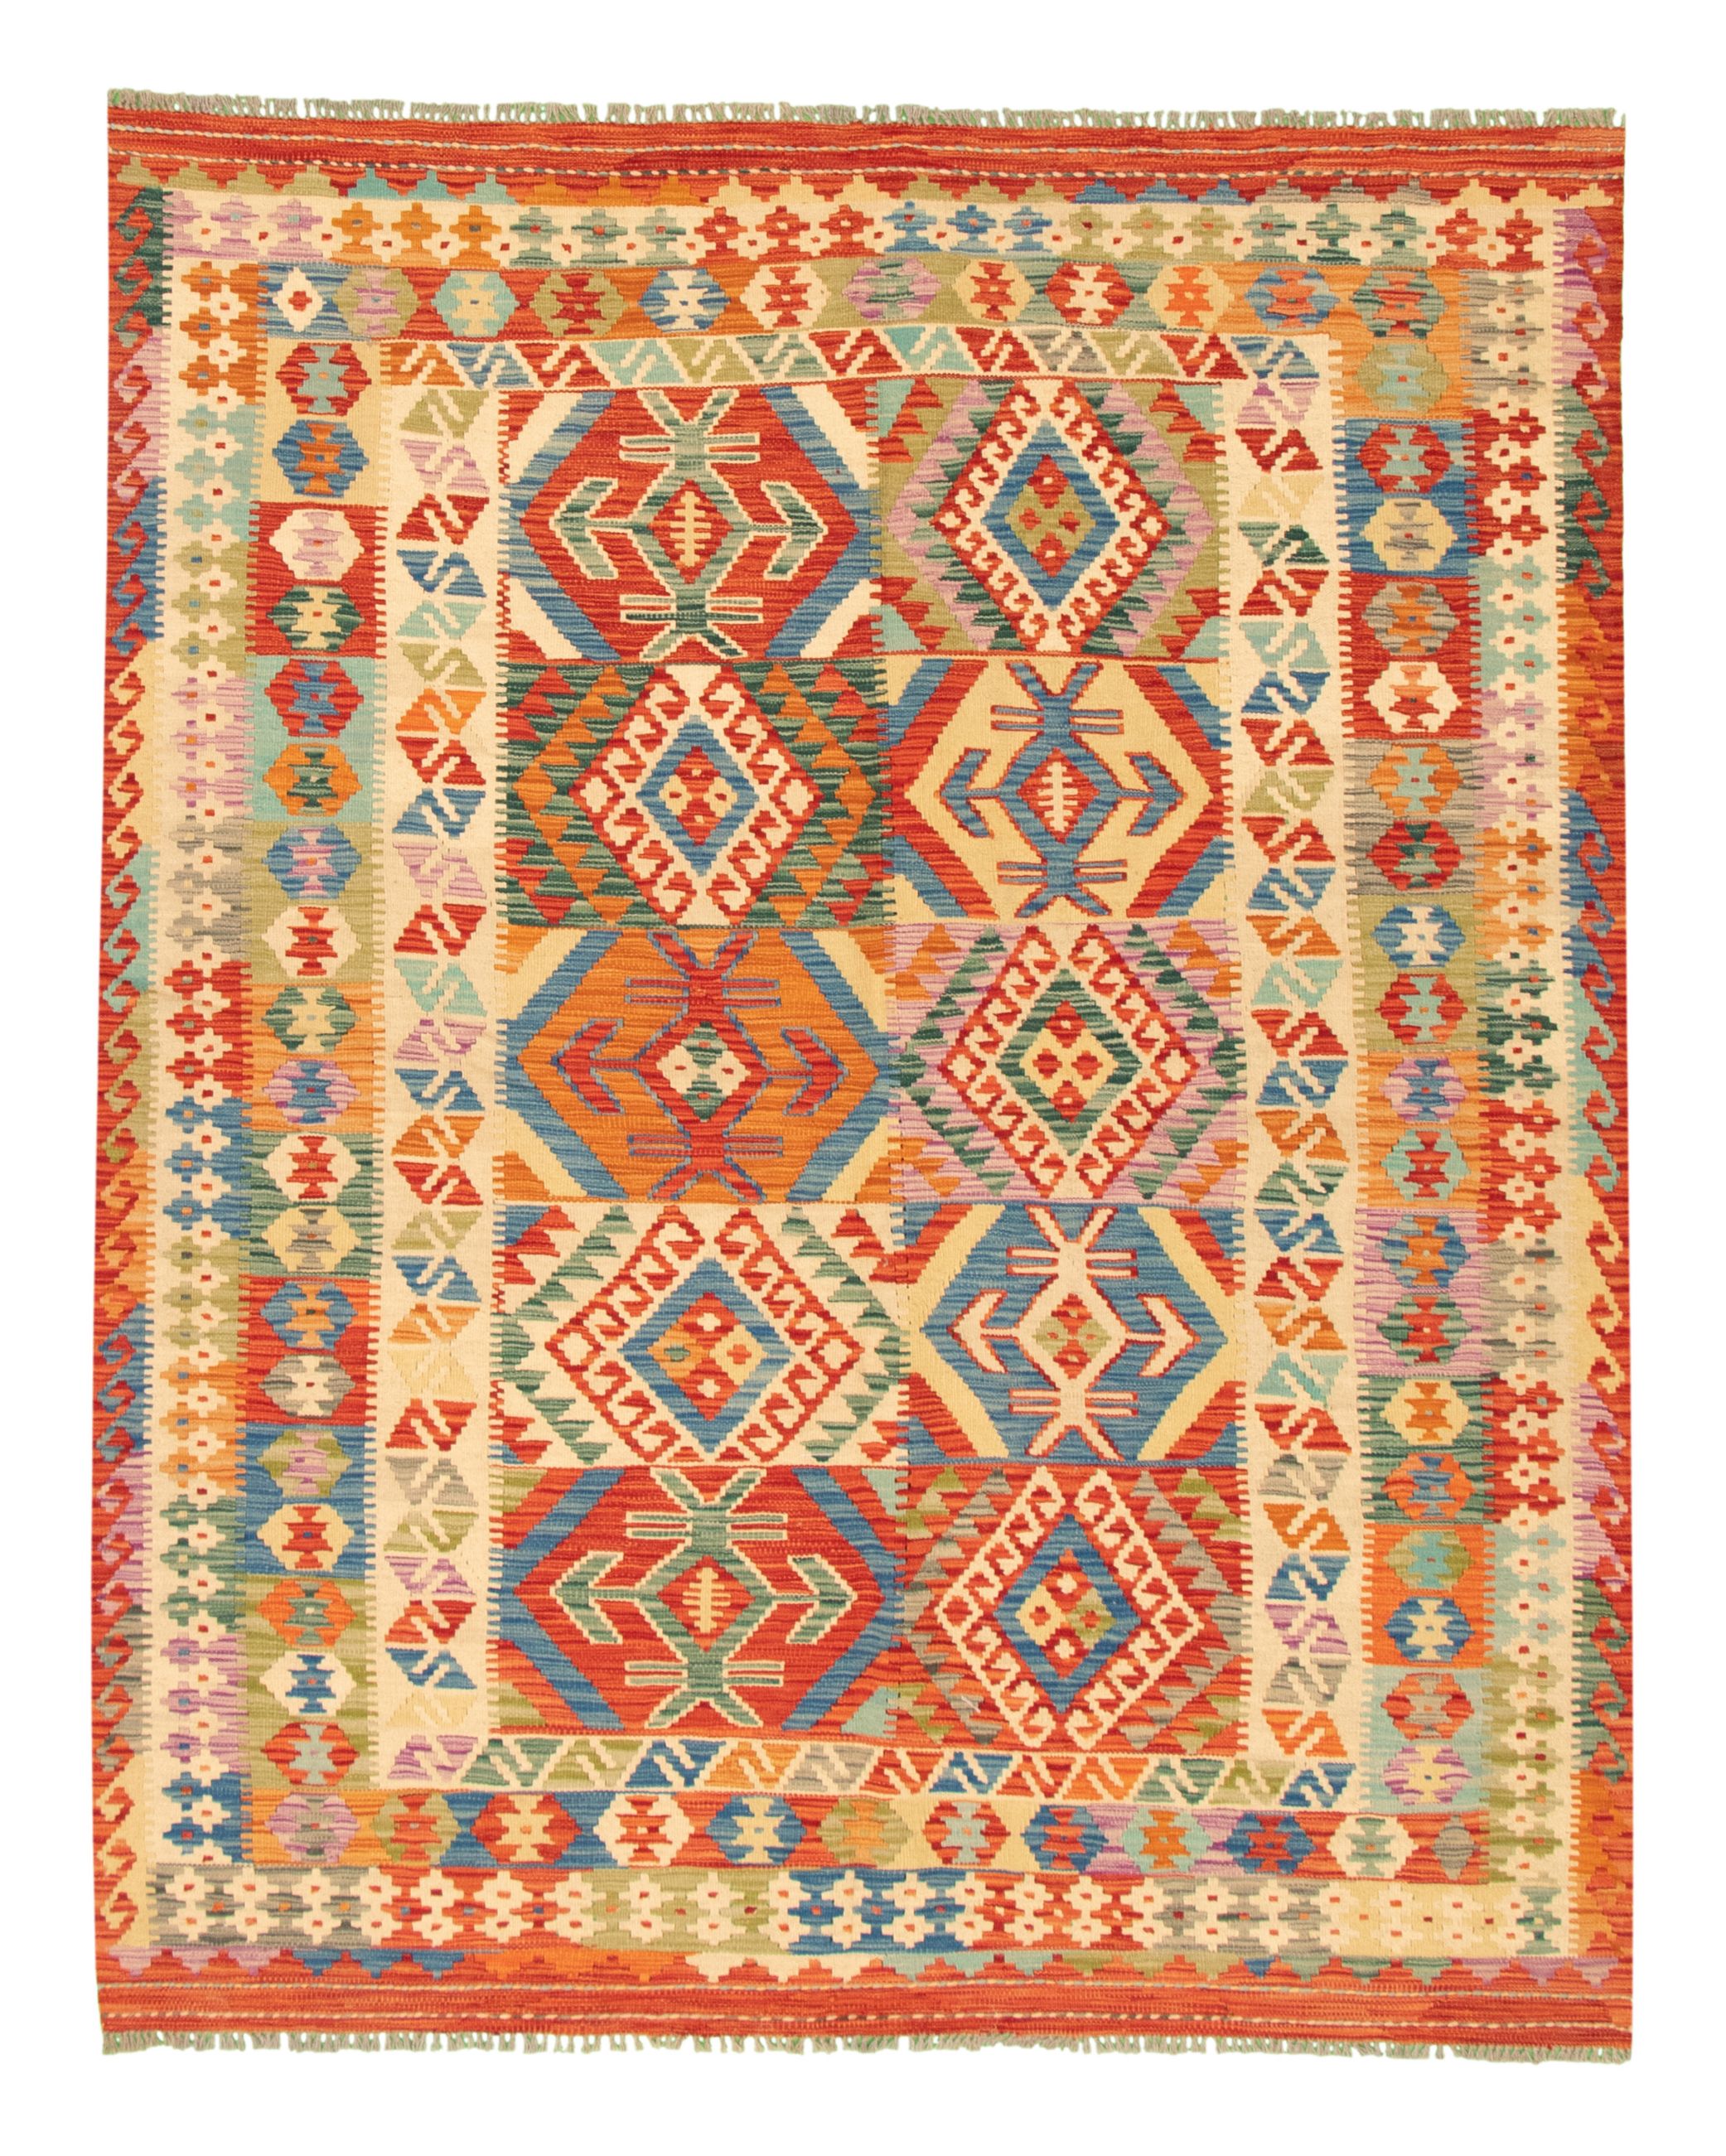 Hand woven Bold and Colorful  Ivory, Red Wool Kilim 6'0" x 7'8" Size: 6'0" x 7'8"  